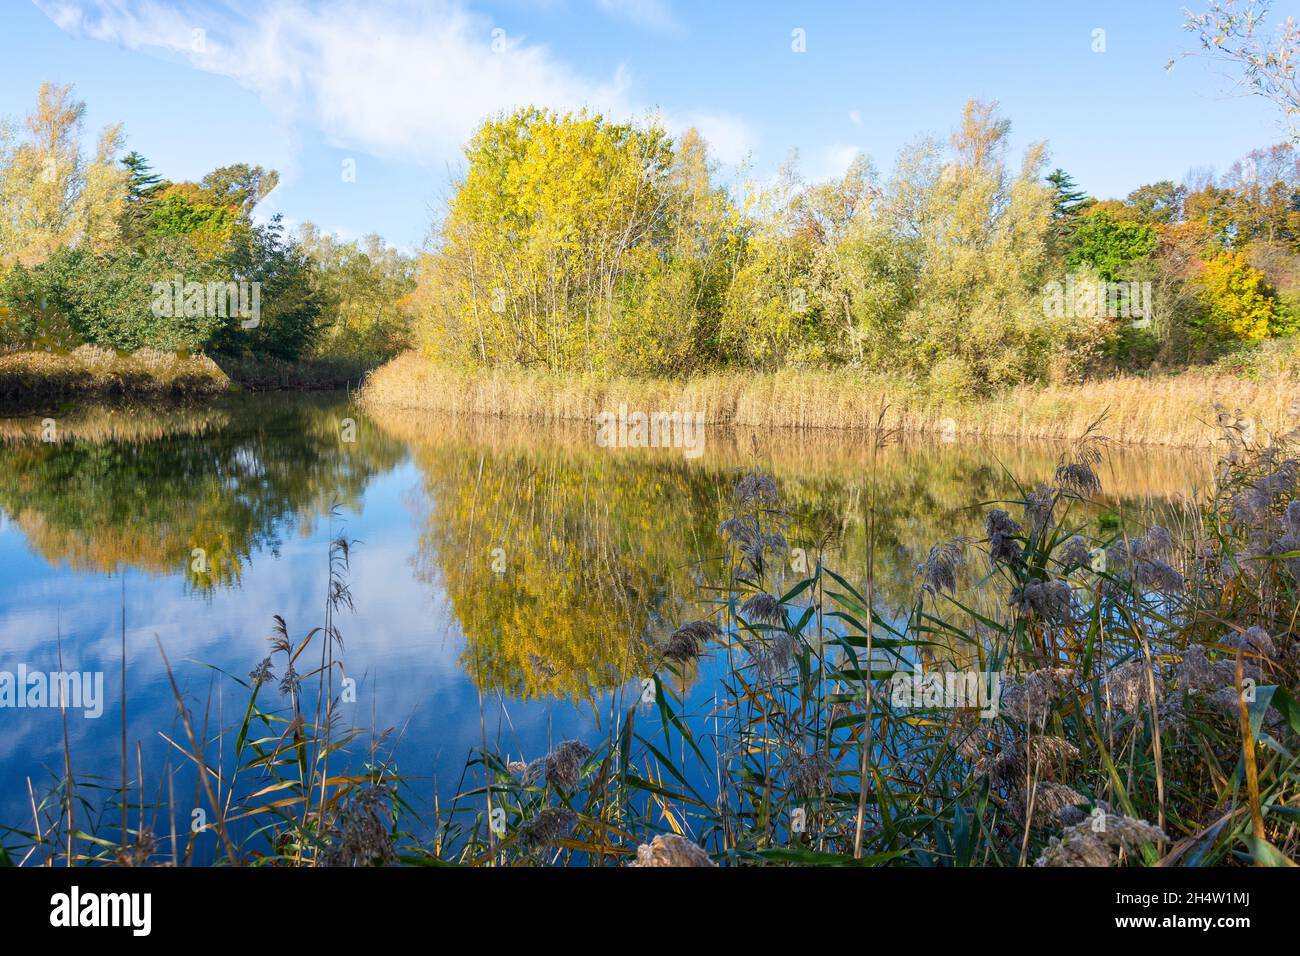 Swan Lake in autunno, Bedfont Lakes Country Park, Bedfont, London Borough of Hounslow, Greater London, England, Regno Unito Foto Stock